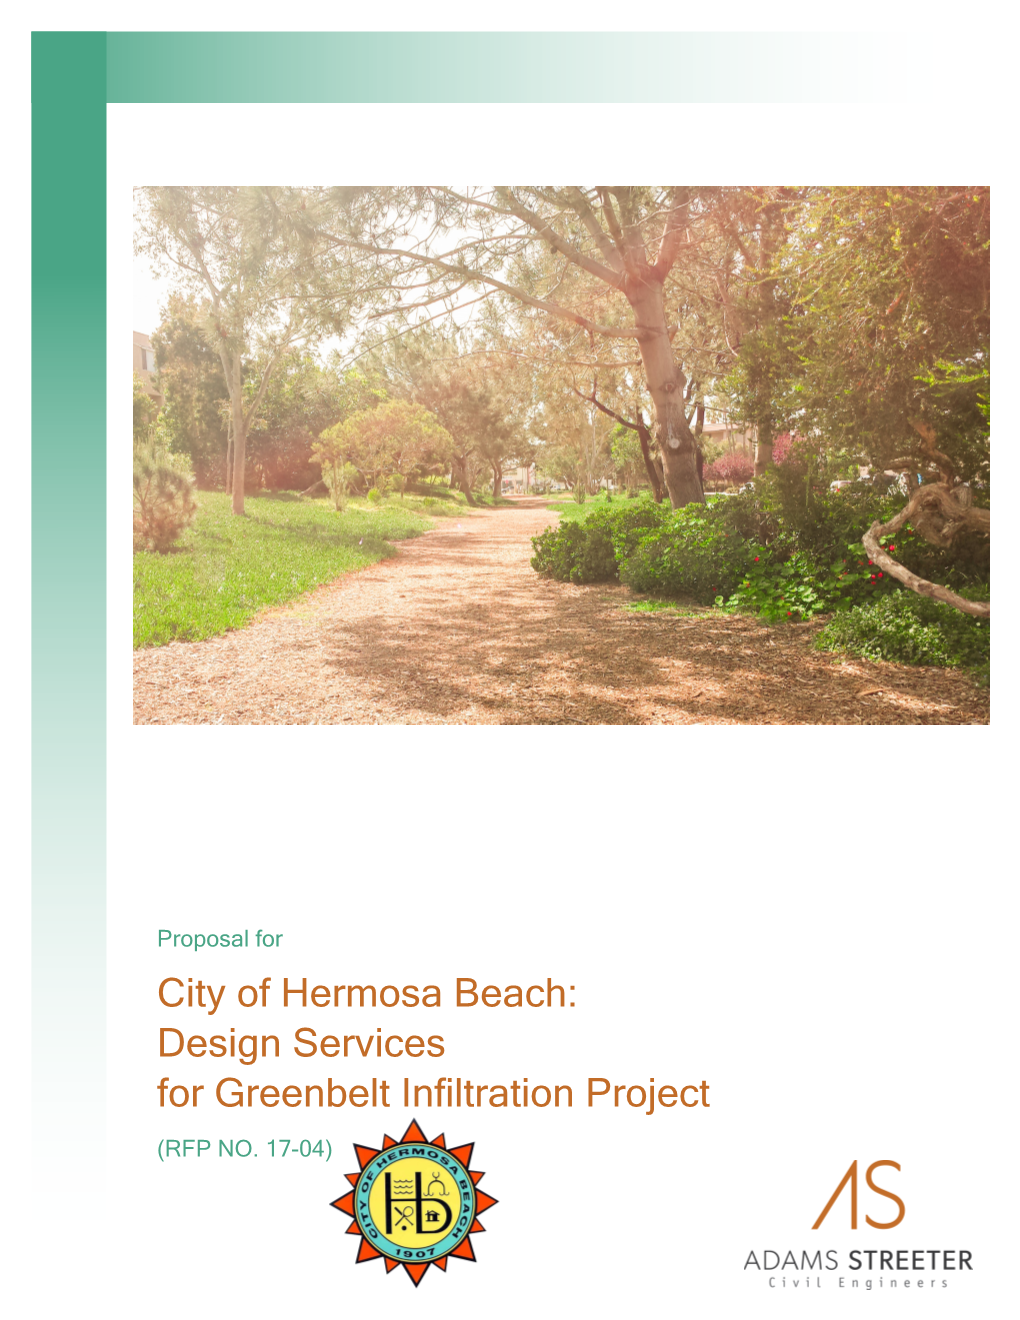 Design Services for Greenbelt Infiltration Project (RFP NO